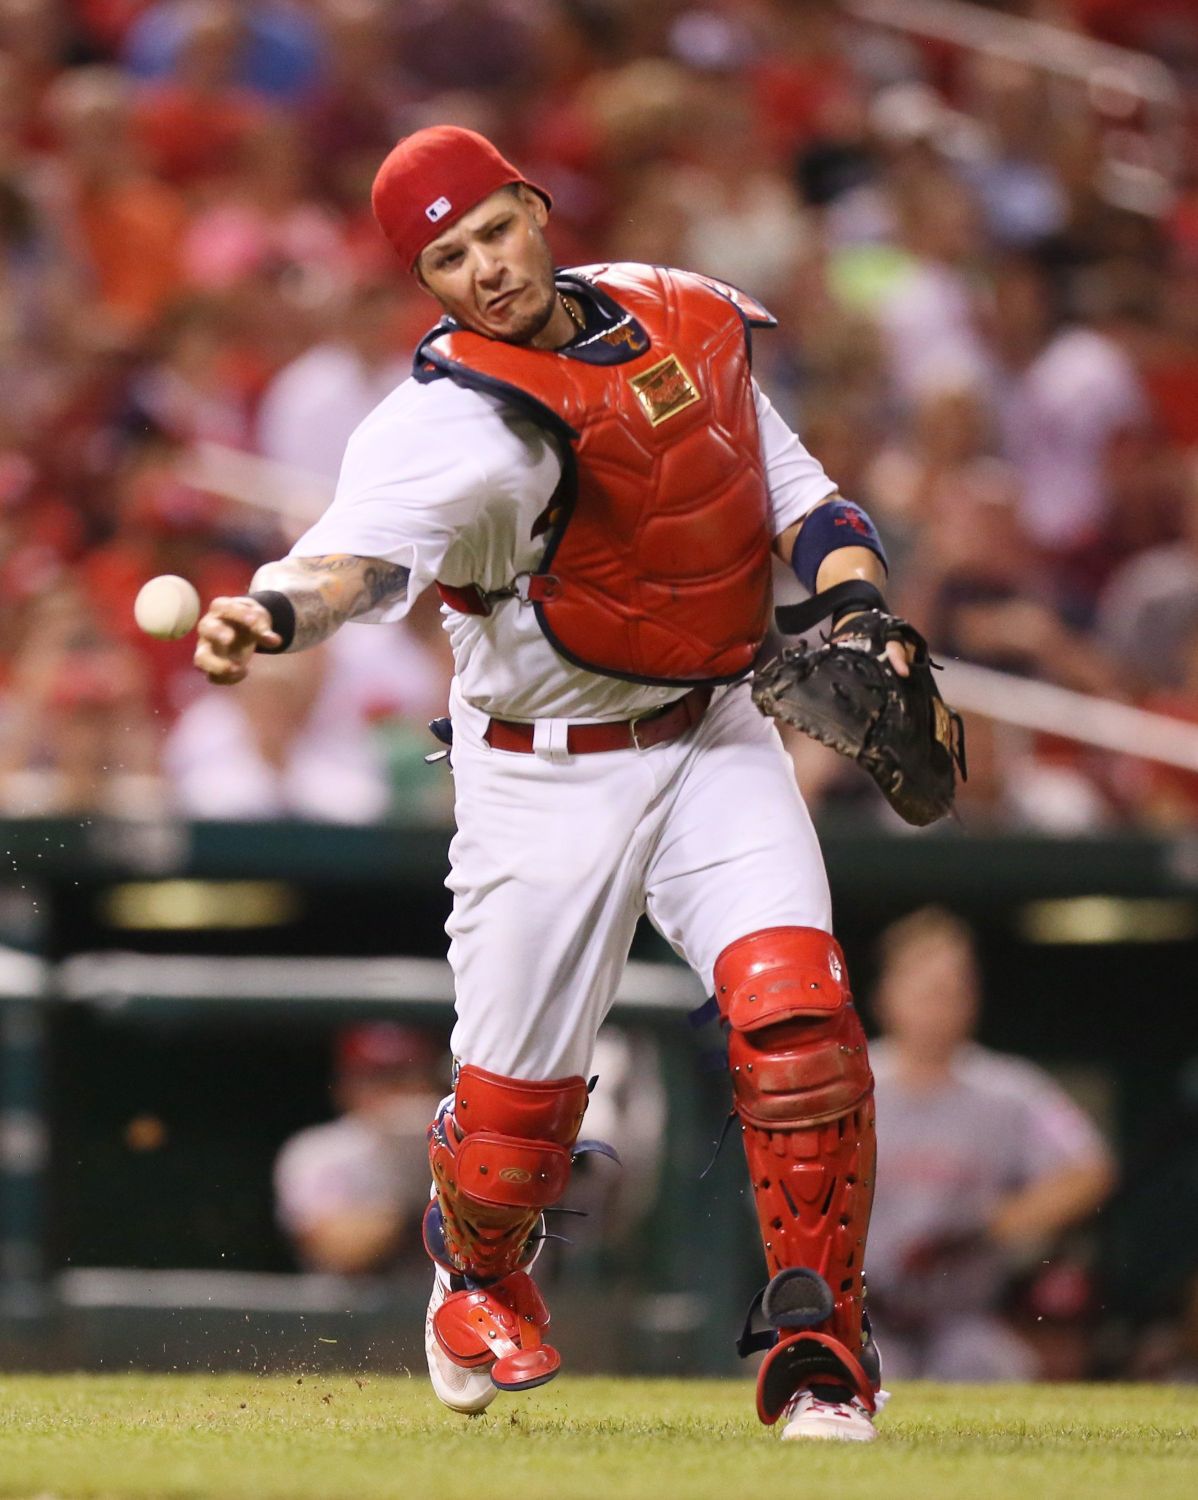 Arch City Media - Cardinals catcher Andrew Knizner has filled in nicely  when Yadier Molina needs a day off. The Richmond, Va., native has hit  safely in 12-of-18 games he's started in